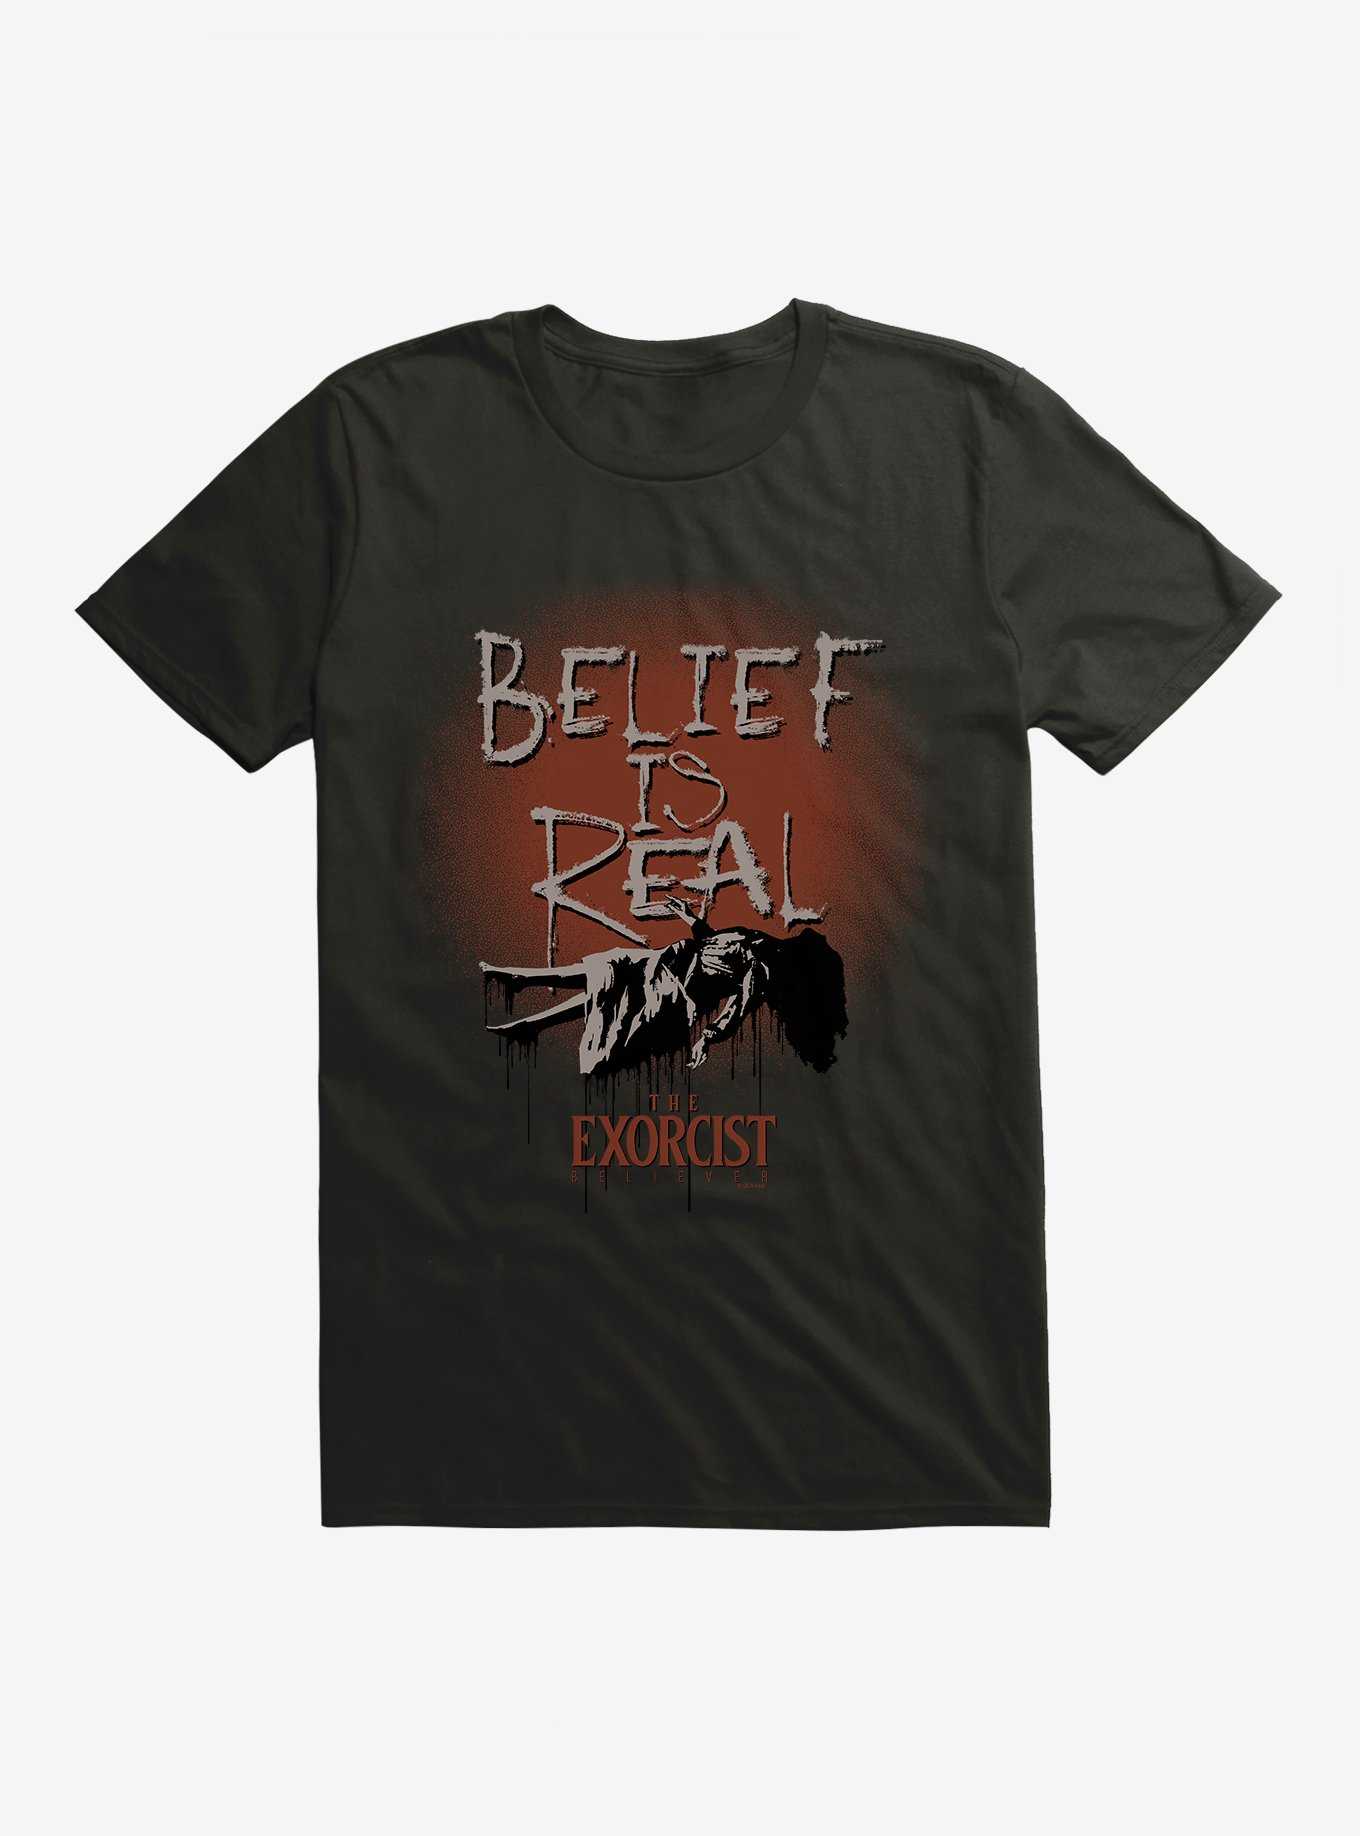 The Exorcist Believer Belief Is Real T-Shirt, , hi-res